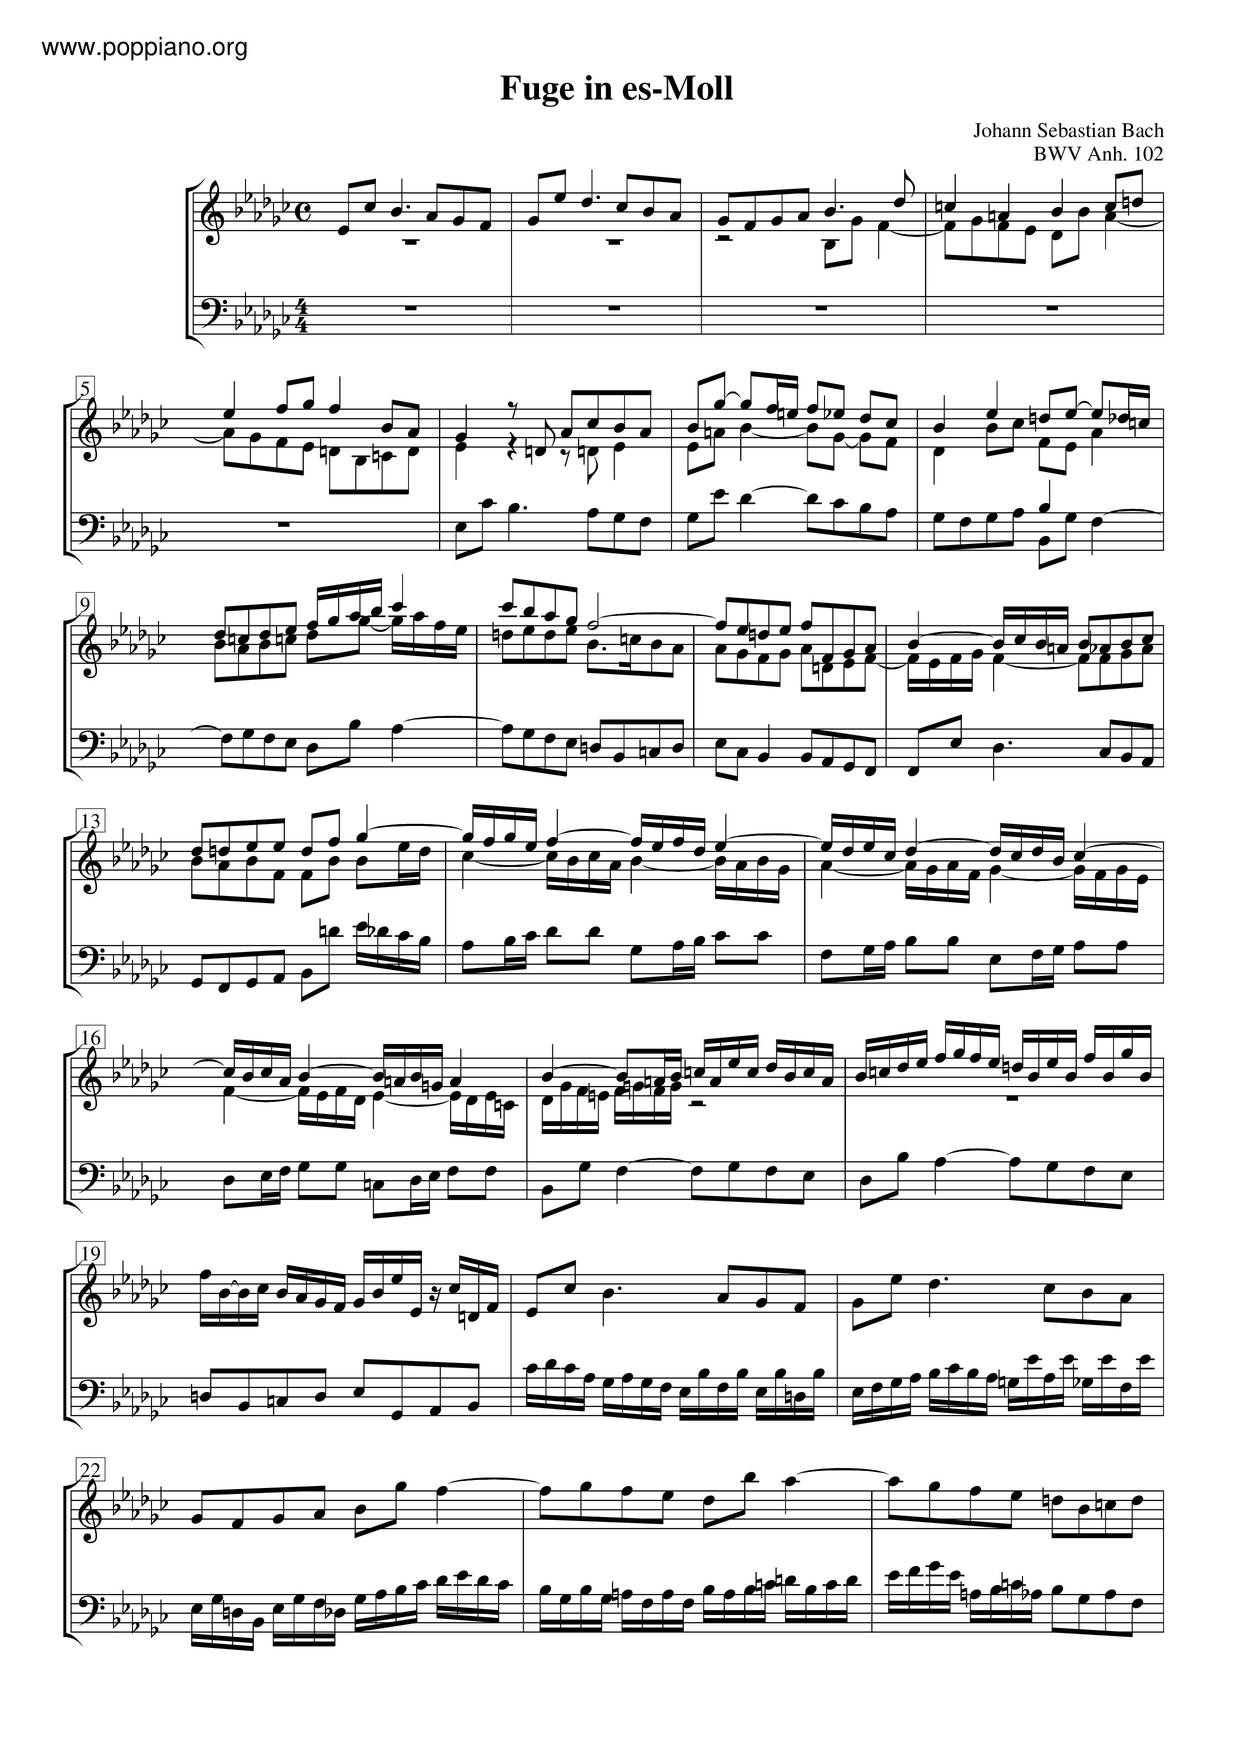 Fugue In G-Flat Major, BWV Anh. 102 Score